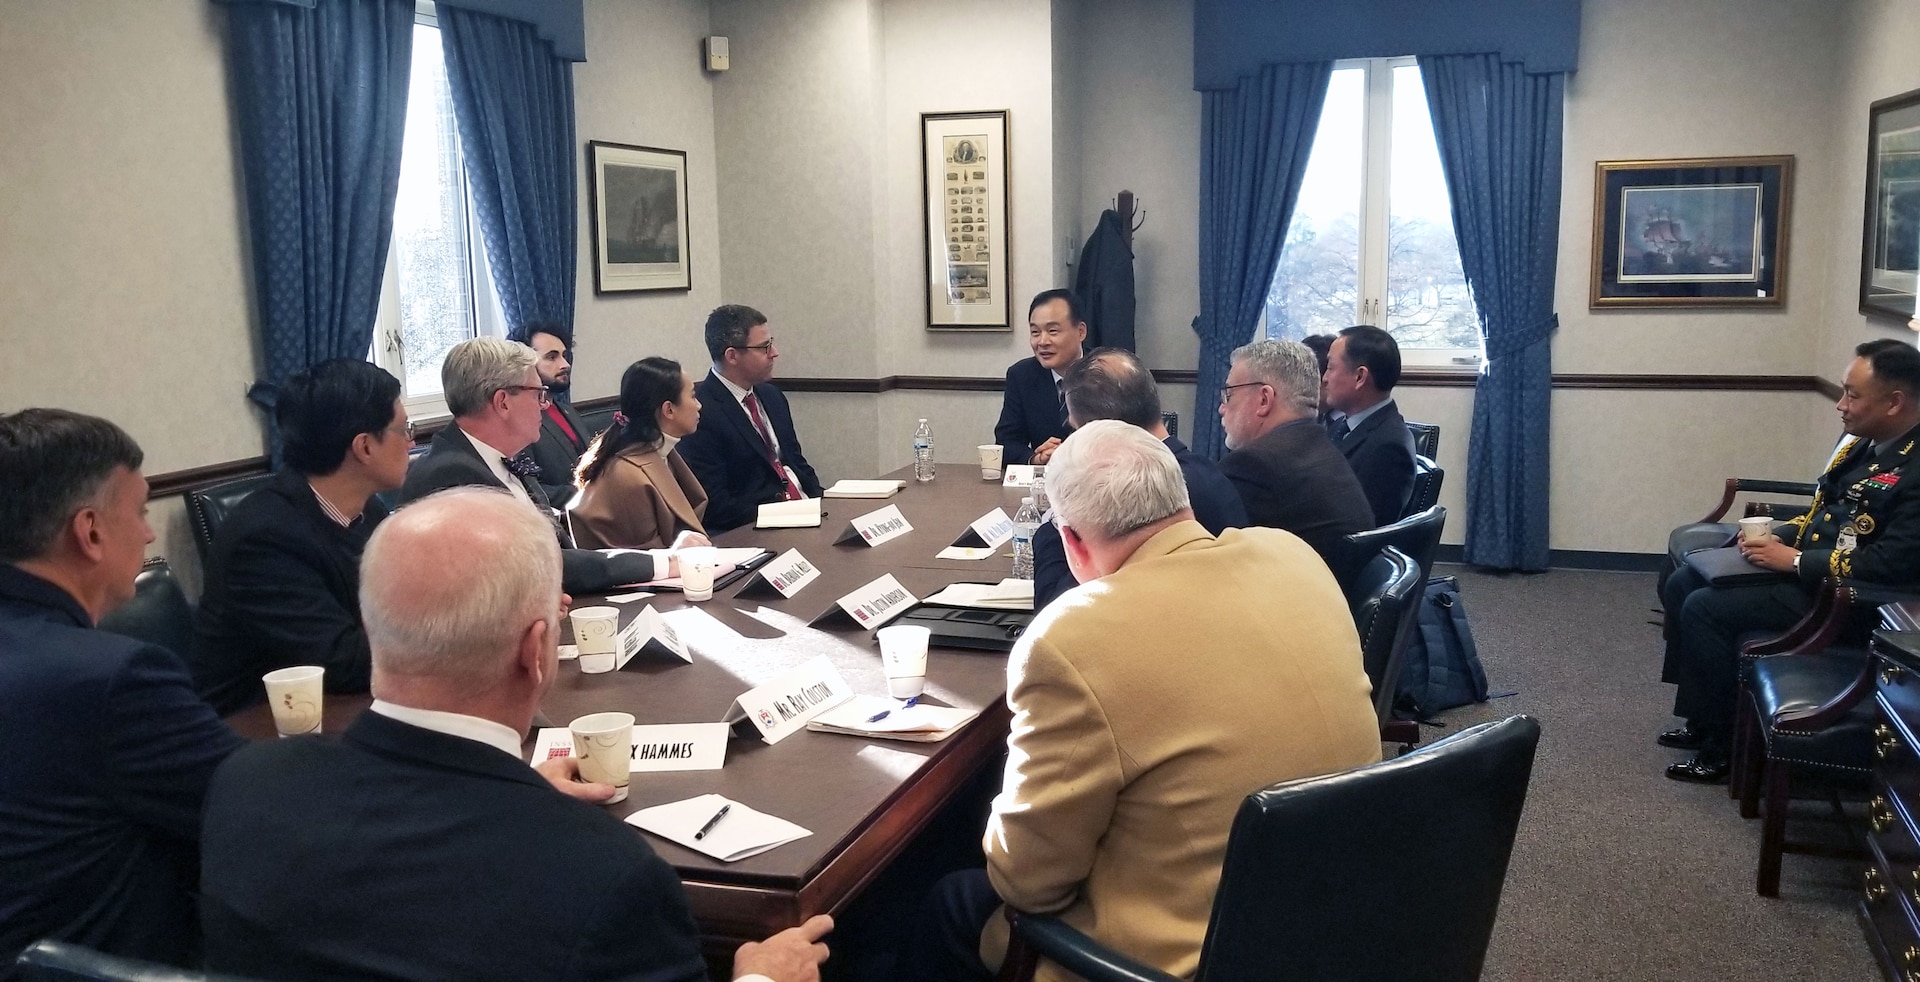 NDU’s Institute for National Strategic Studies hosted a roundtable discussion with the Republic of Korea